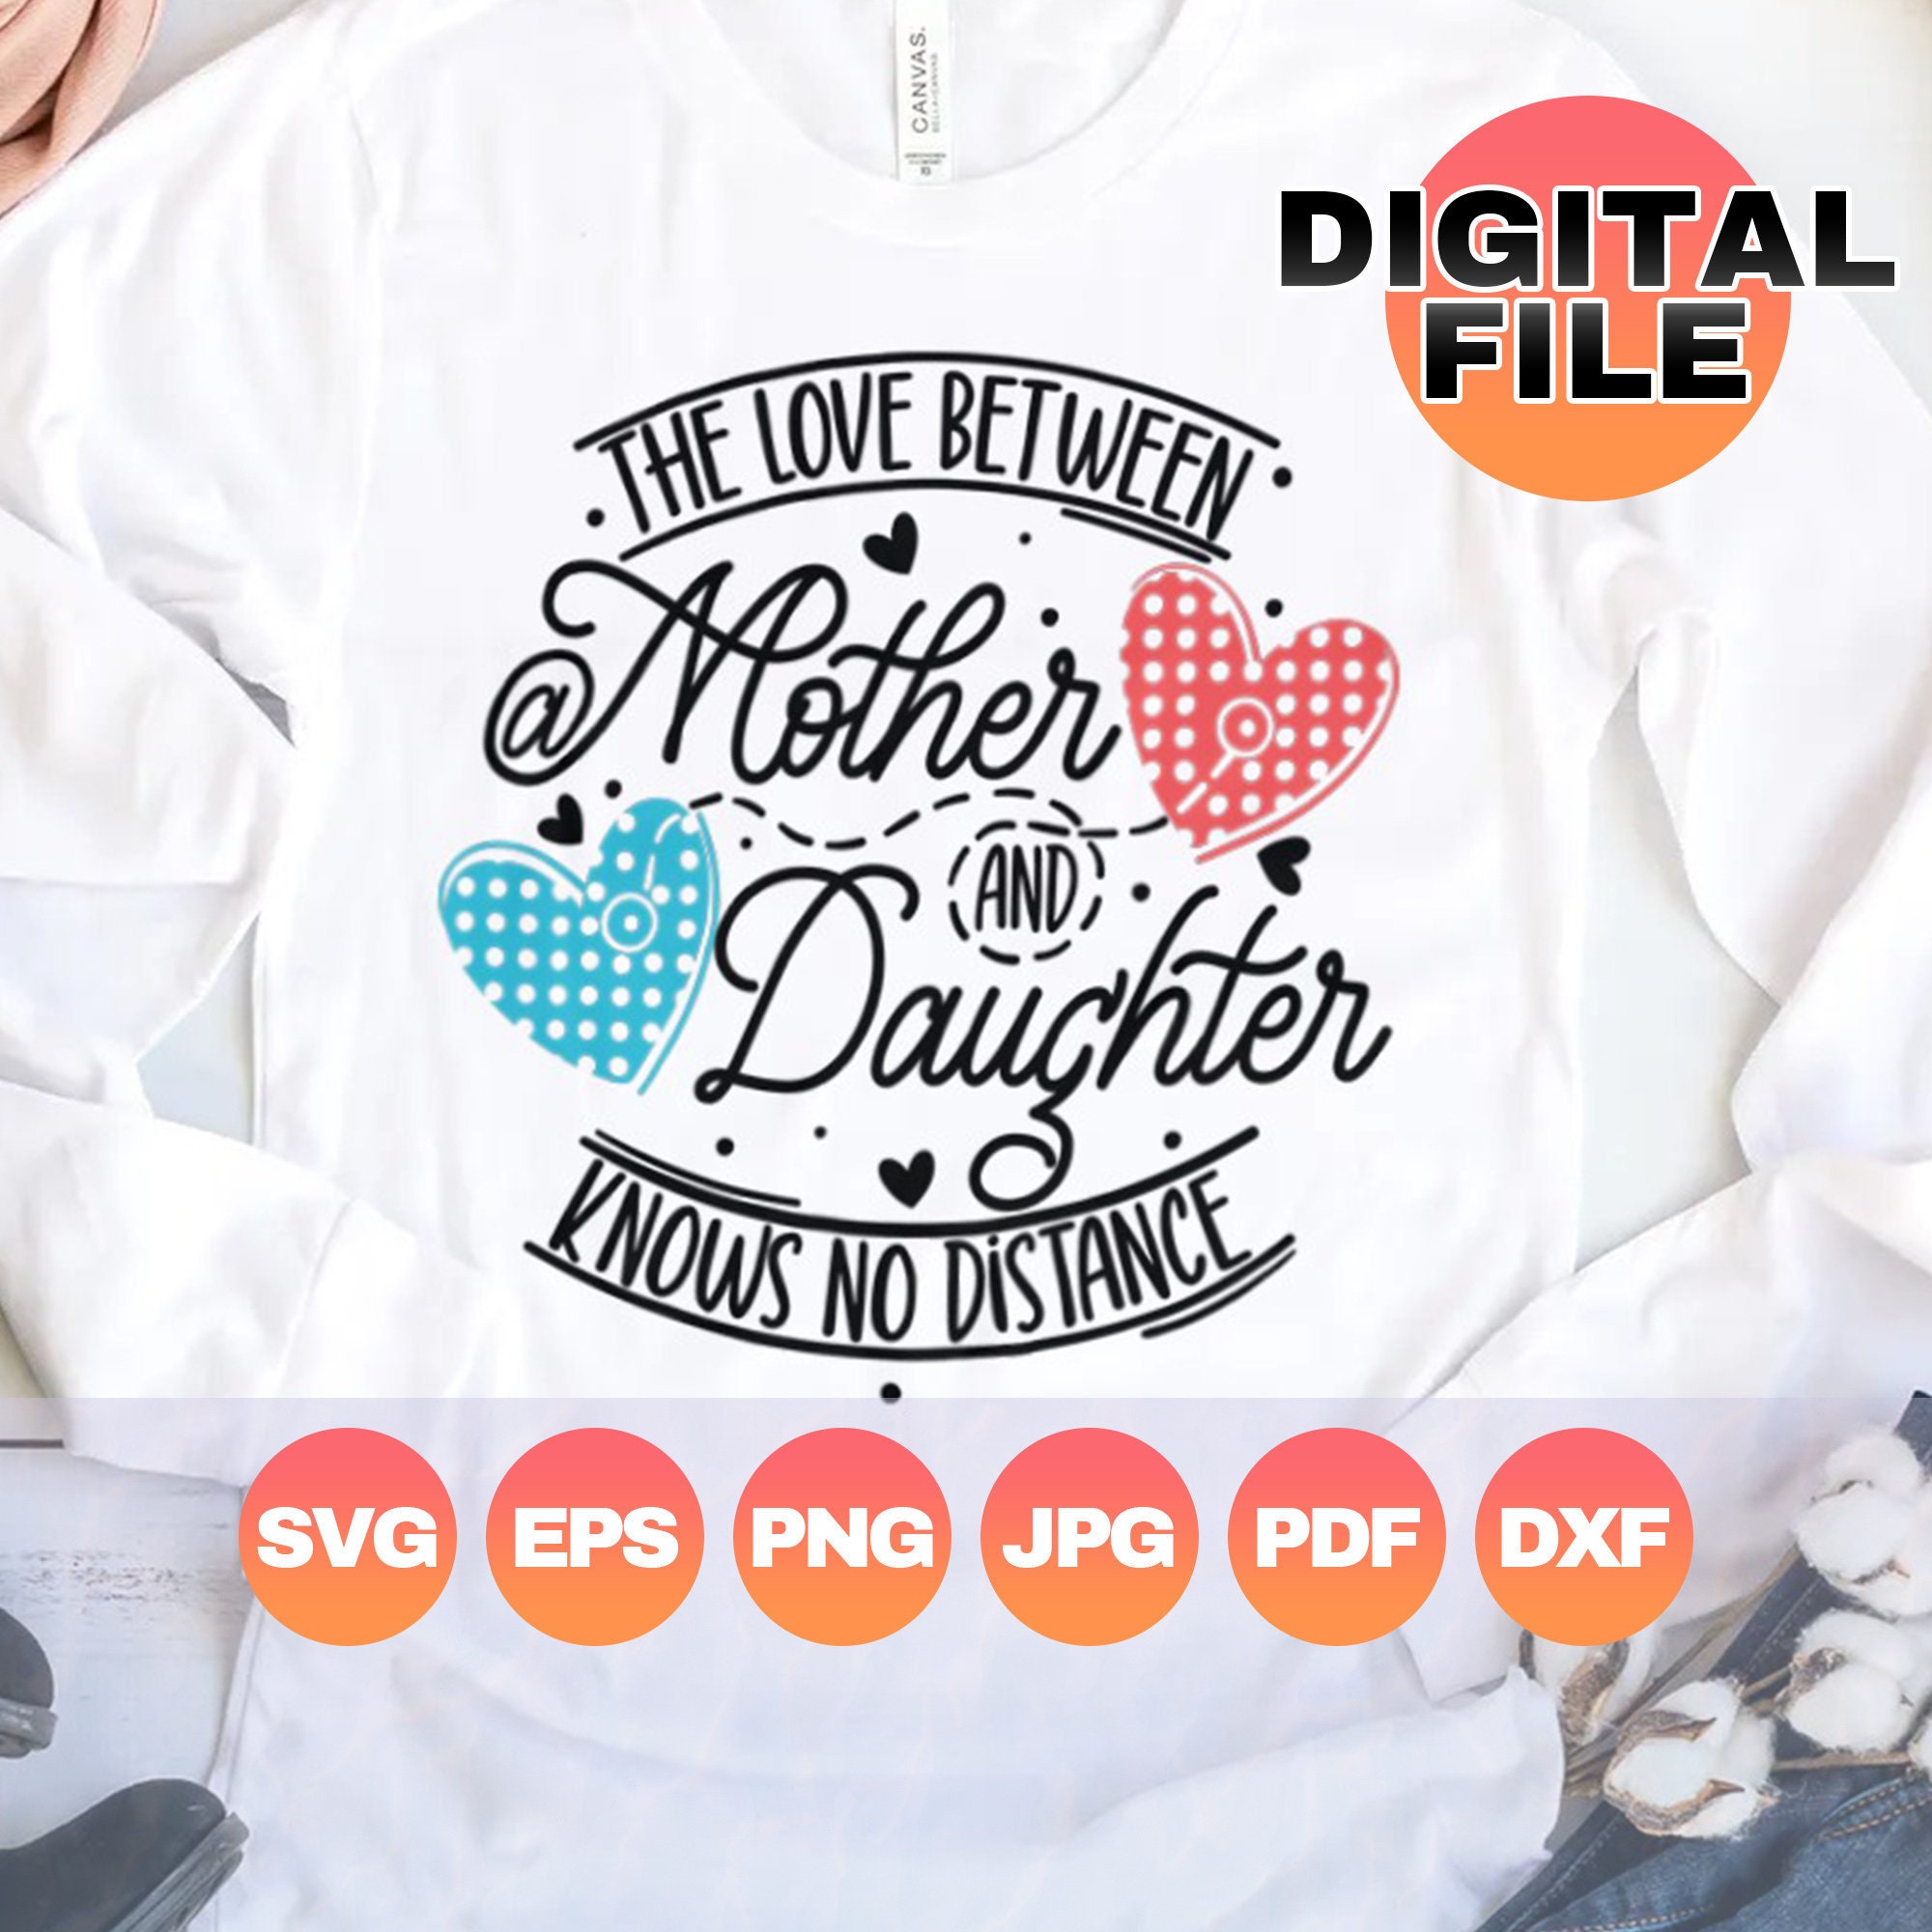 The Love Between Mother And Daughters Knows No Distance, Personalized -  PersonalFury